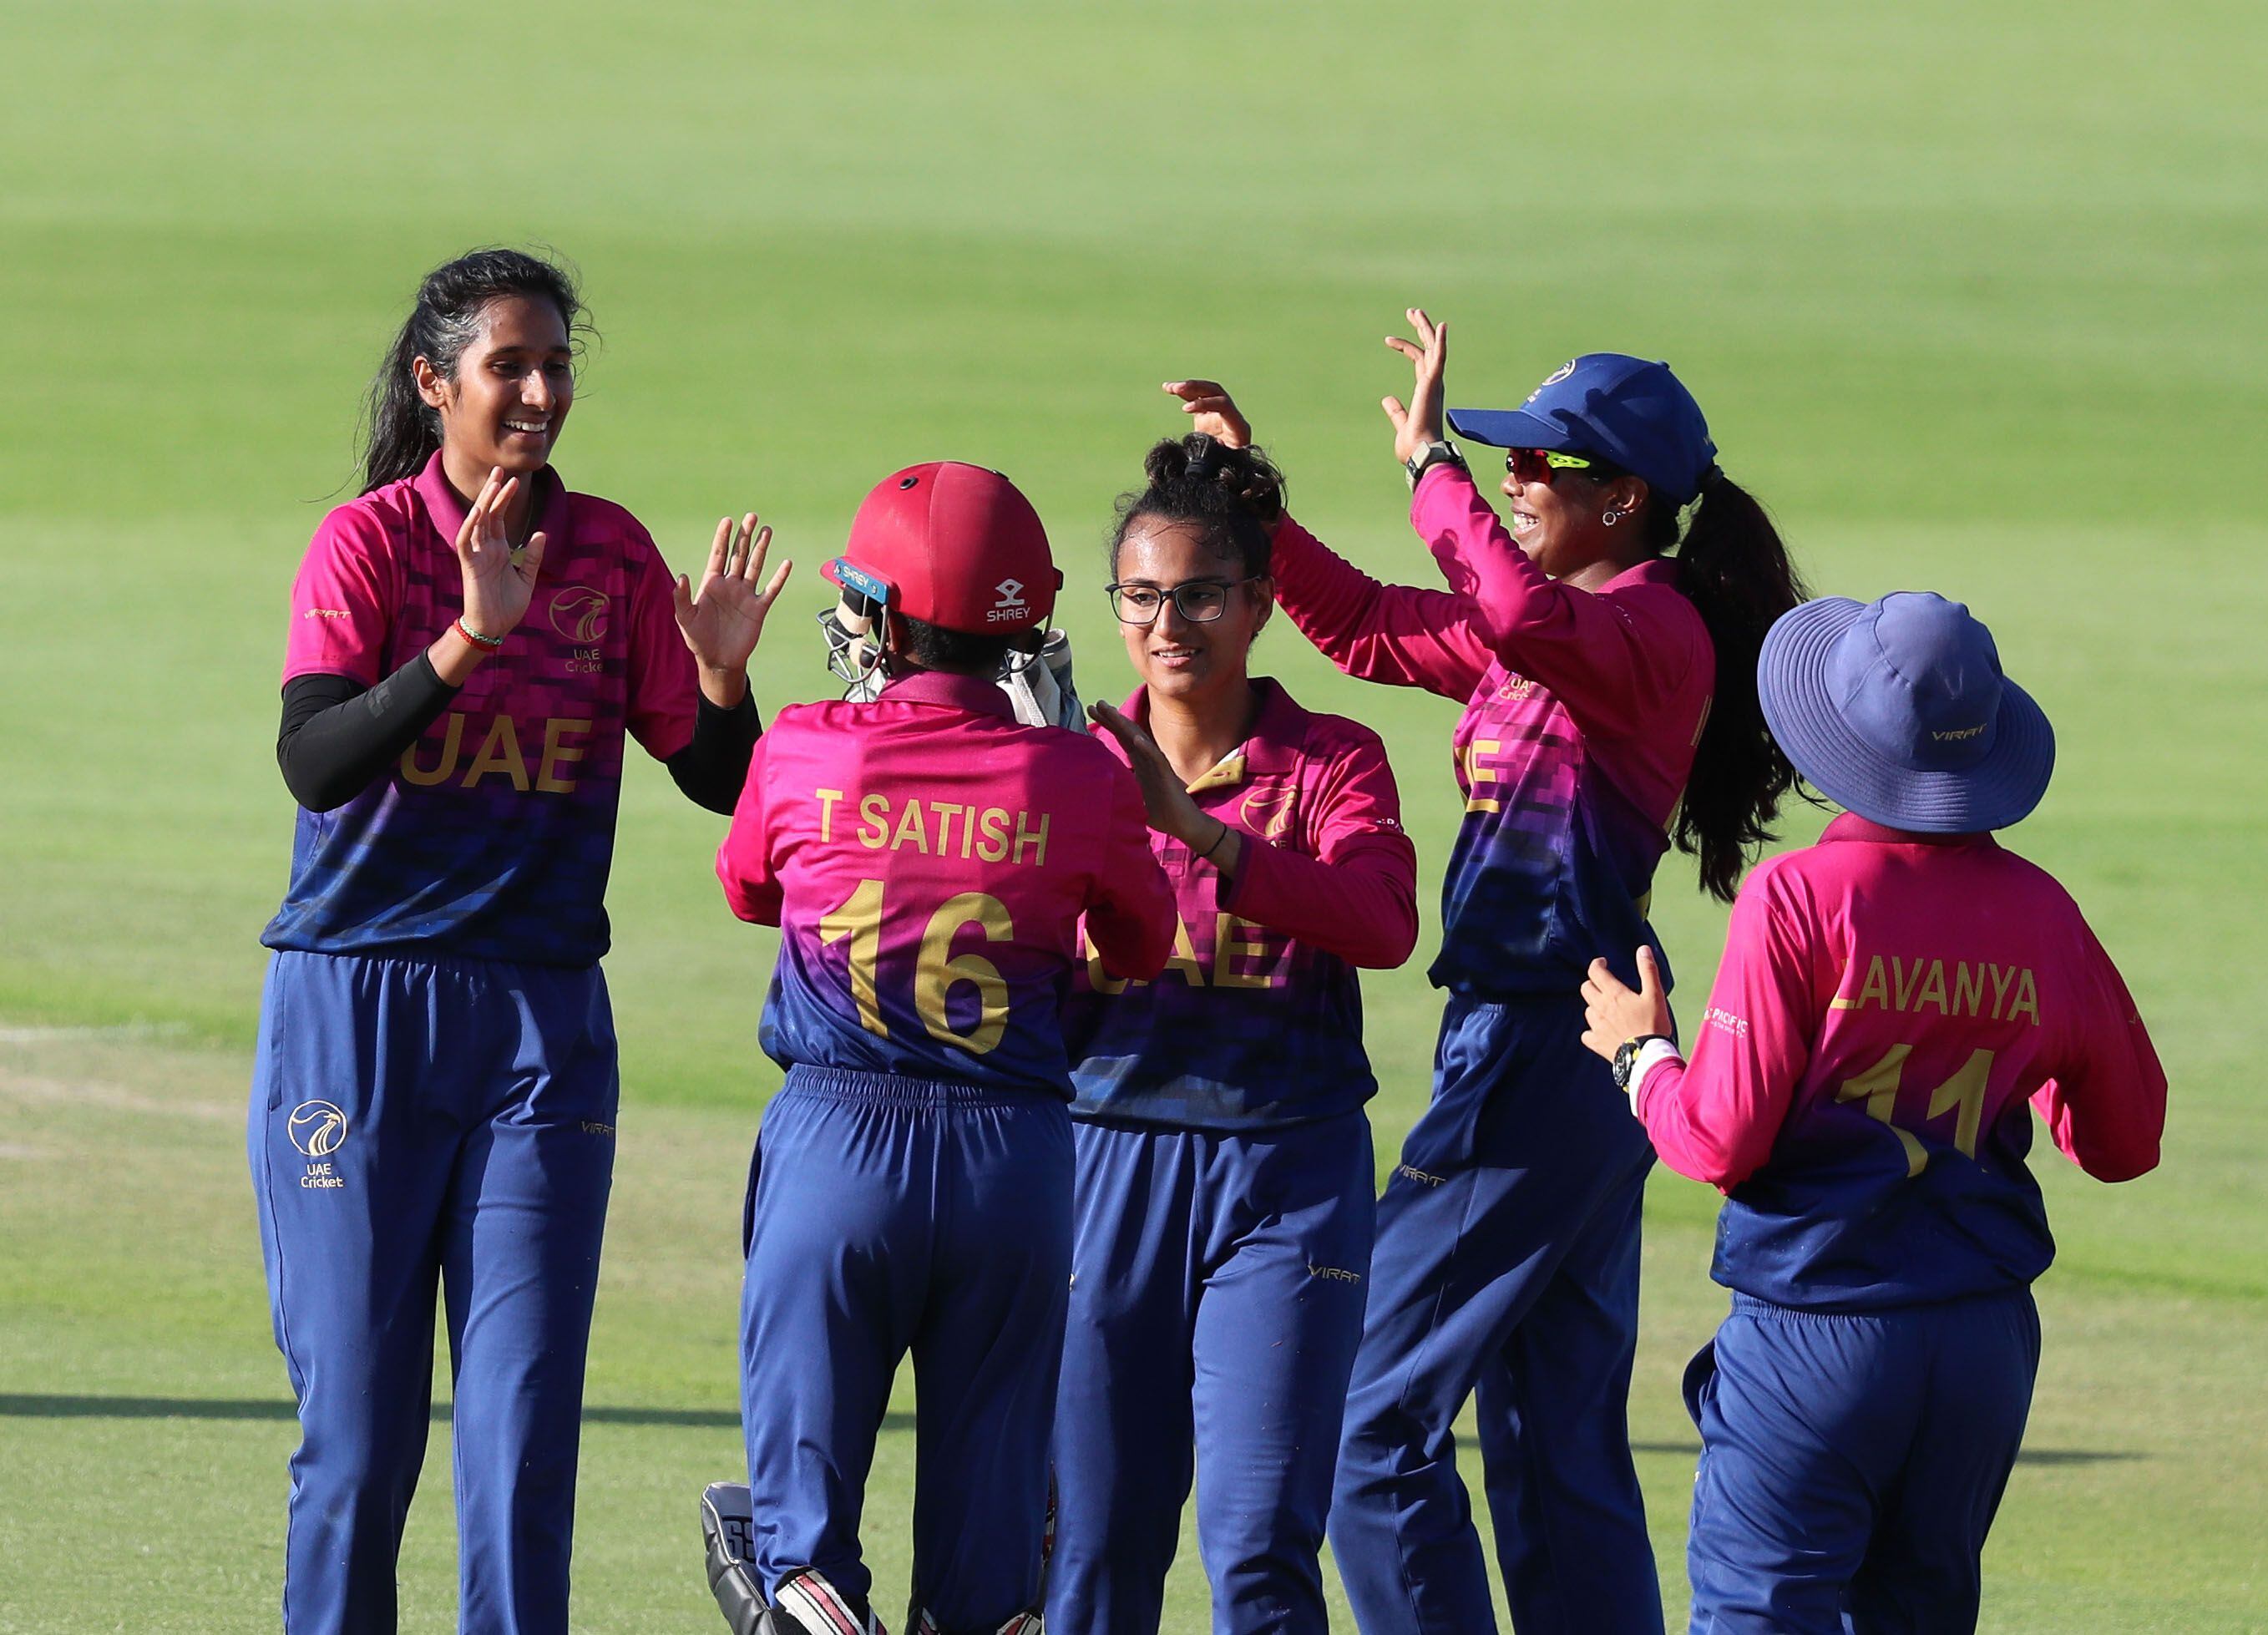 young stars of uae are at crossroads on path to top of women’s cricket